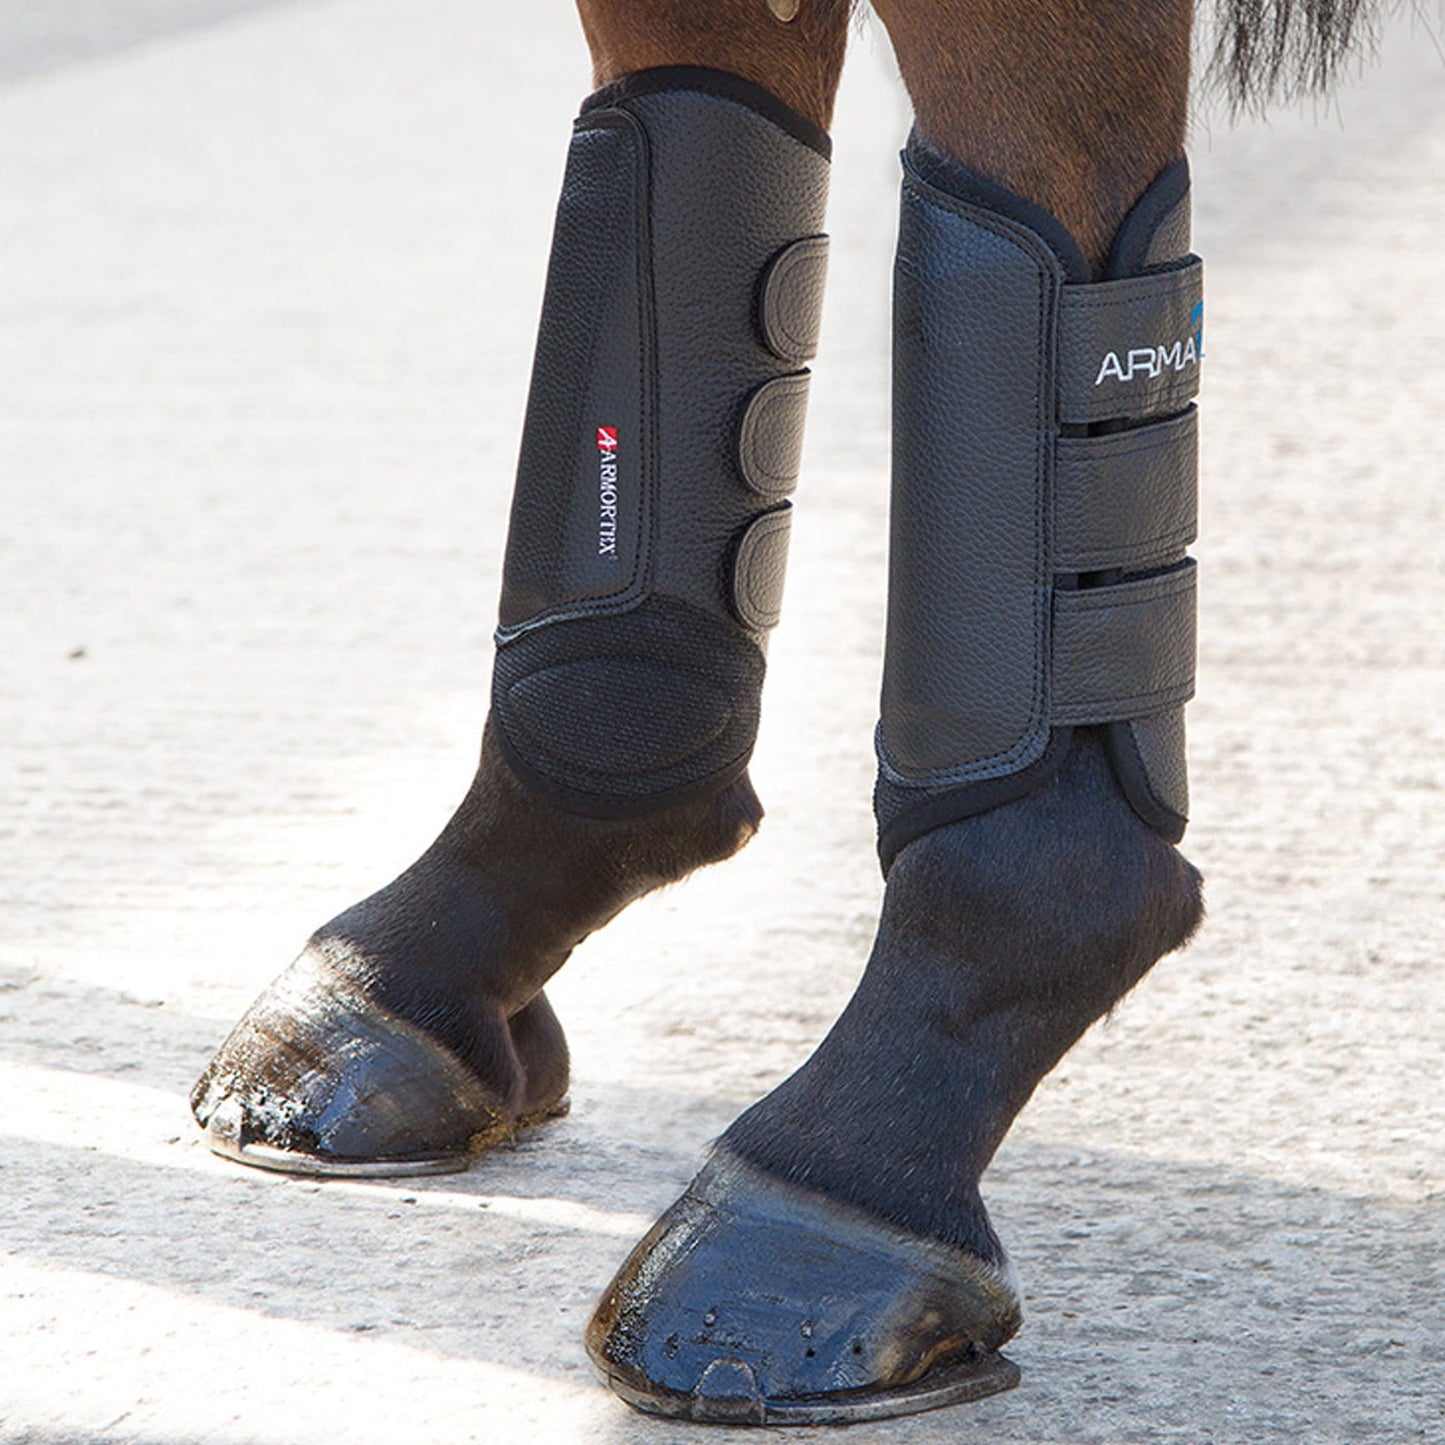 Shires Arma Cross Country Boots Hind Black